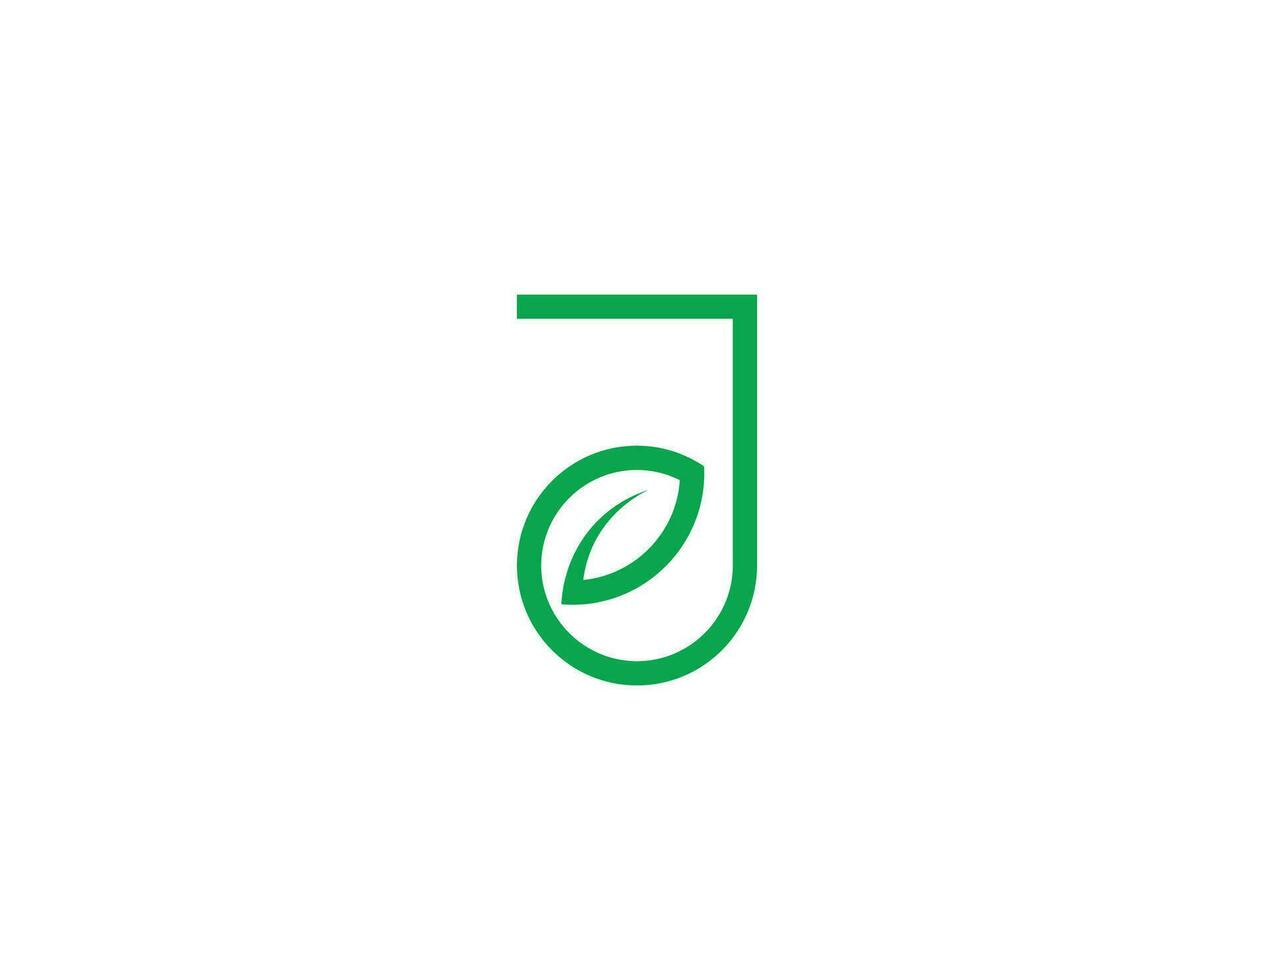 initial Letter J leaf Logo Concept icon sign symbol Element Design. Herbal, Organic, Natural Products, Health Care, Spa Logotype. Vector illustration template